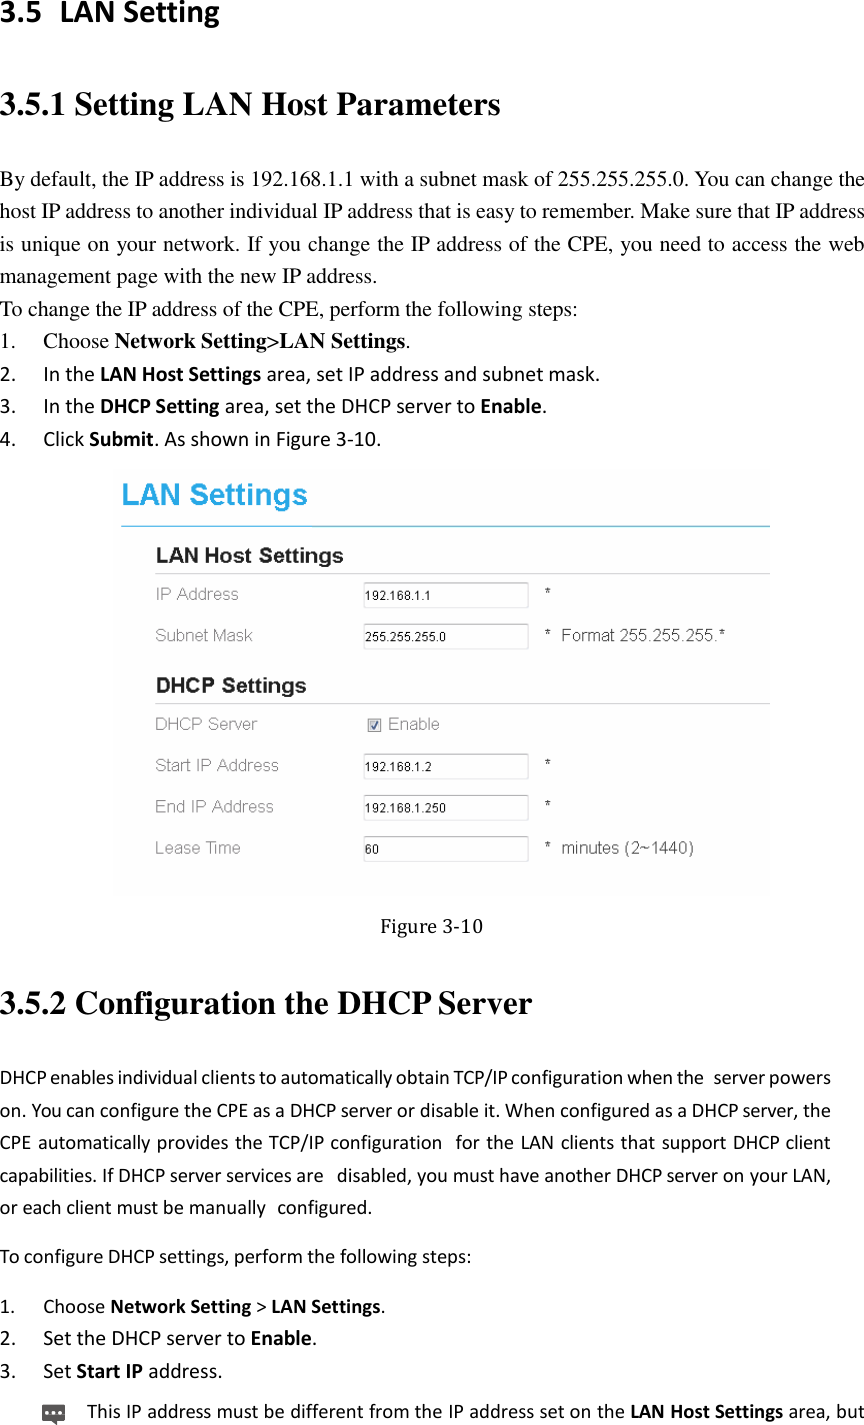   3.5 LAN Setting 3.5.1 Setting LAN Host Parameters By default, the IP address is 192.168.1.1 with a subnet mask of 255.255.255.0. You can change the host IP address to another individual IP address that is easy to remember. Make sure that IP address is unique on your network. If you change the IP address of the CPE, you need to access the web management page with the new IP address. To change the IP address of the CPE, perform the following steps: 1. Choose Network Setting&gt;LAN Settings. 2. In the LAN Host Settings area, set IP address and subnet mask. 3. In the DHCP Setting area, set the DHCP server to Enable. 4. Click Submit. As shown in Figure 3-10.  Figure 3-10 3.5.2 Configuration the DHCP Server DHCP enables individual clients to automatically obtain TCP/IP configuration when the  server powers on. You can configure the CPE as a DHCP server or disable it. When configured as a DHCP server, the CPE automatically provides the TCP/IP configuration  for the LAN clients that support DHCP client capabilities. If DHCP server services are  disabled, you must have another DHCP server on your LAN, or each client must be manually  configured. To configure DHCP settings, perform the following steps: 1. Choose Network Setting &gt; LAN Settings. 2. Set the DHCP server to Enable. 3. Set Start IP address. This IP address must be different from the IP address set on the LAN Host Settings area, but 